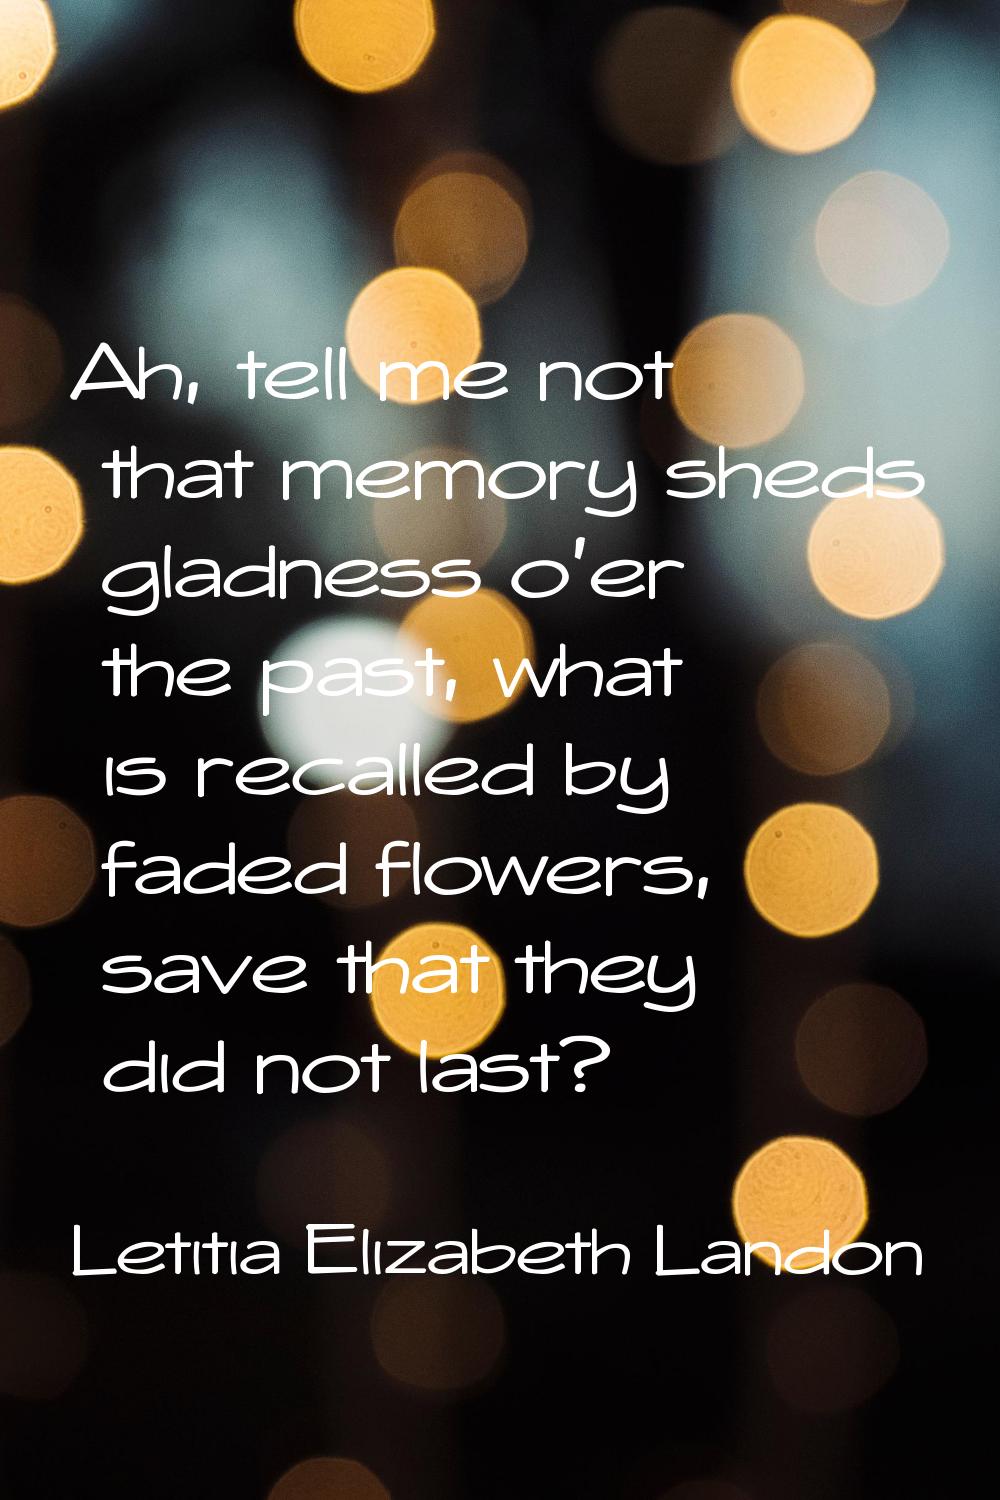 Ah, tell me not that memory sheds gladness o'er the past, what is recalled by faded flowers, save t